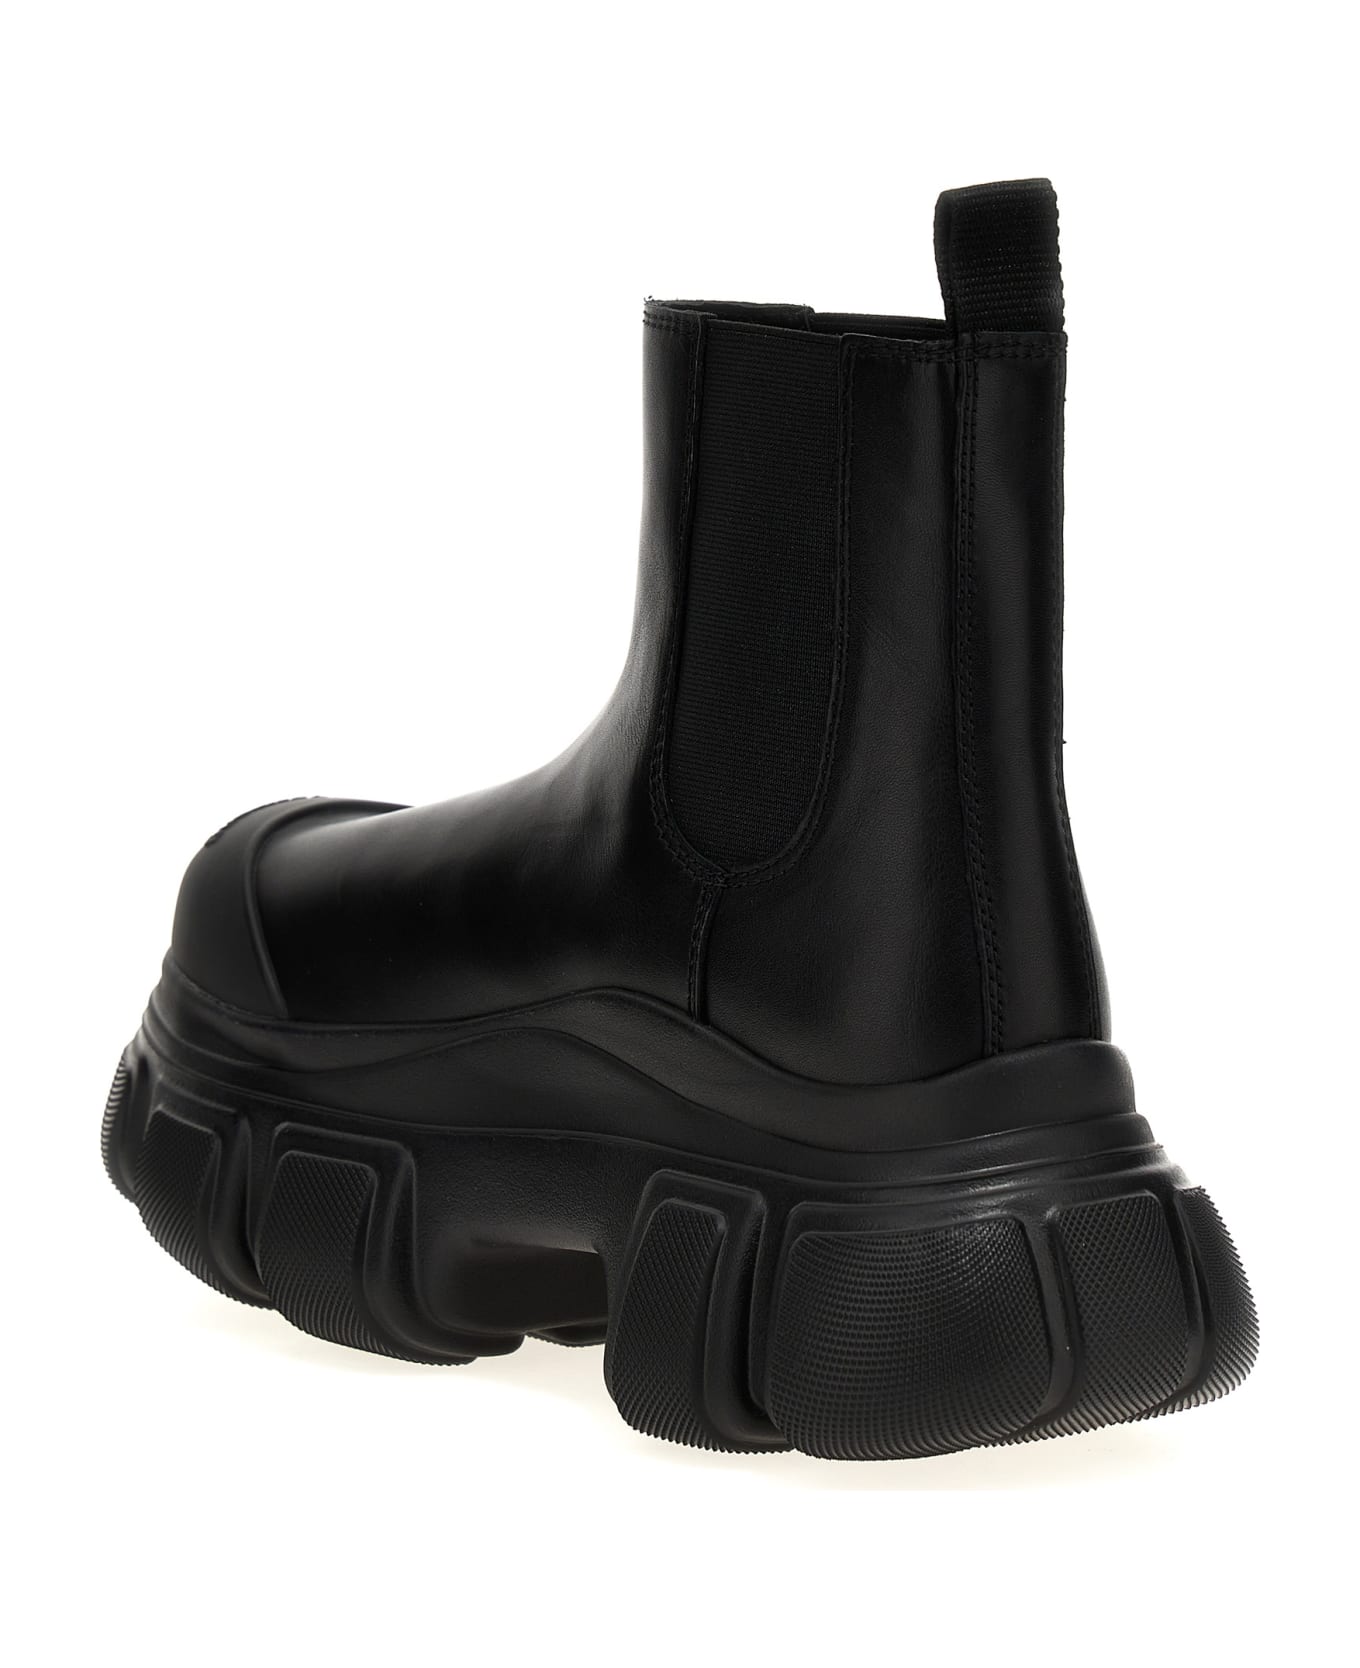 Alexander Wang 'storm' Ankle Boots - Black  